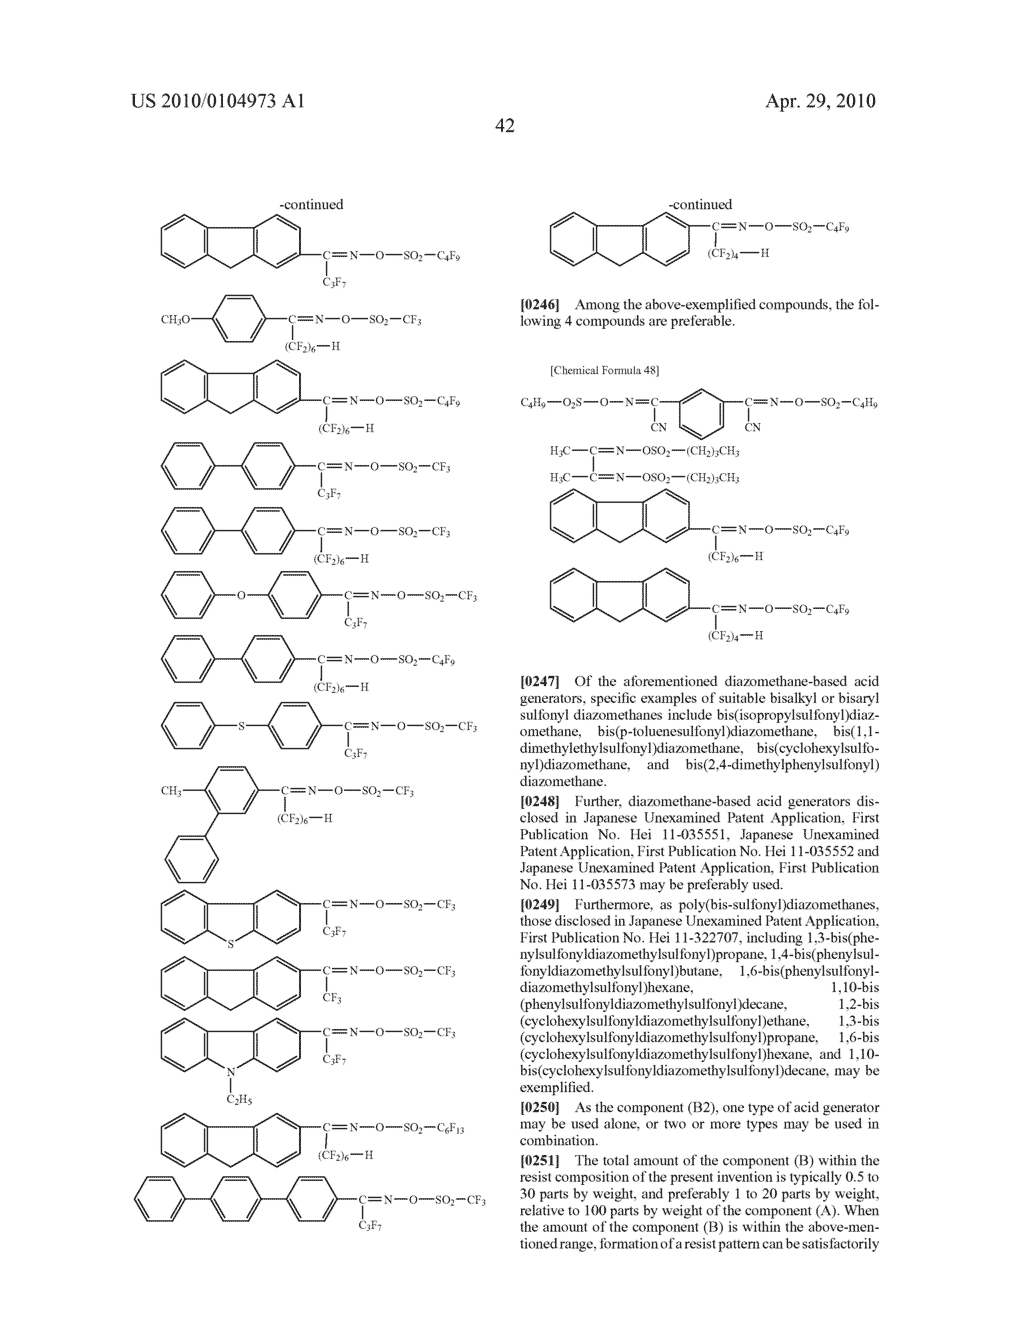 COMPOUND, ACID GENERATOR, RESIST COMPOSITION, AND METHOD OF FORMING RESIST PATTERN - diagram, schematic, and image 43